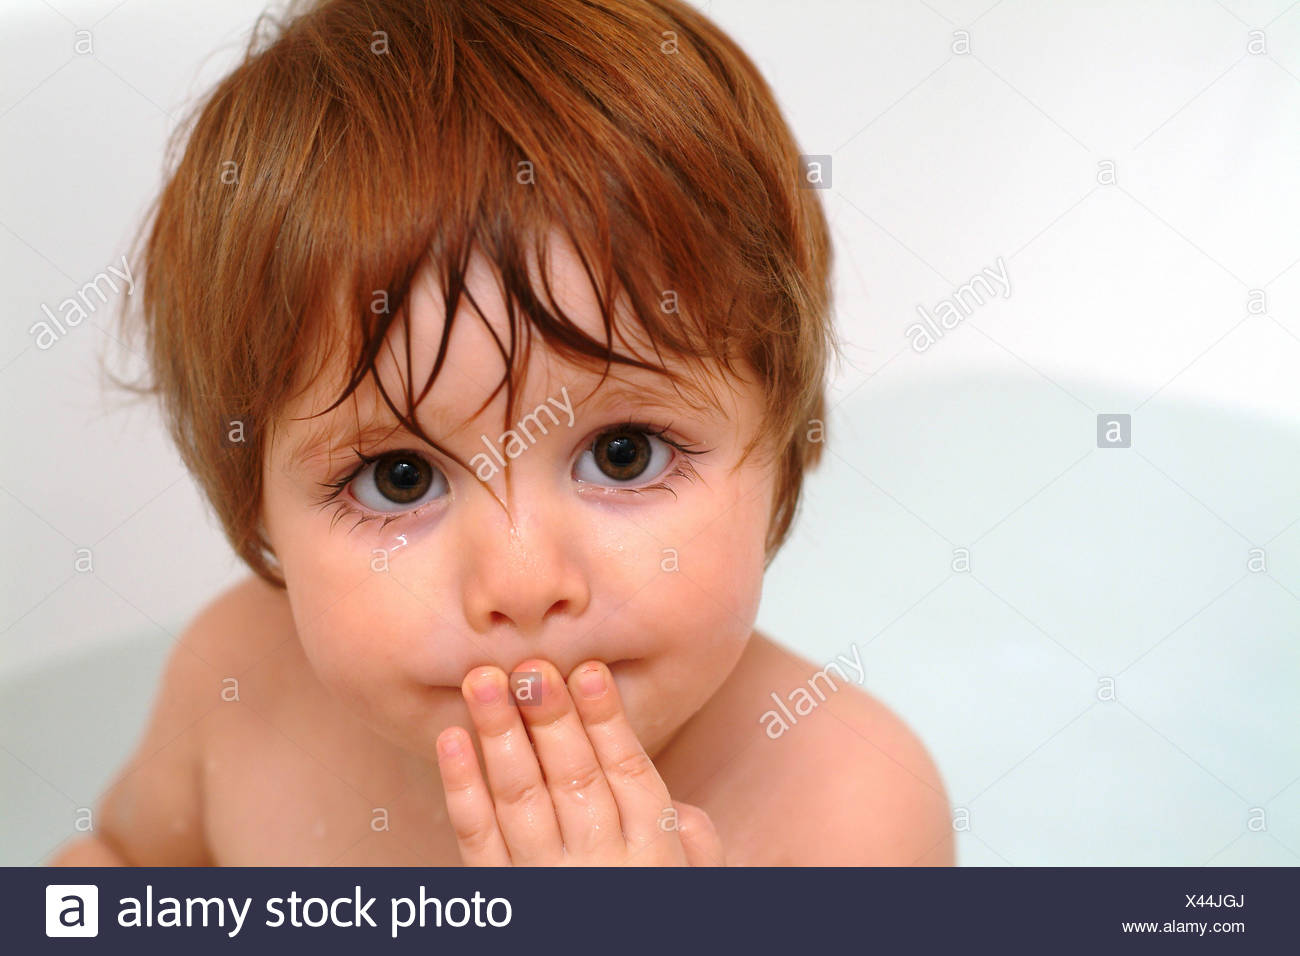 Red Haired Baby Girl With Her Fingers On Her Mouth While Taking A Bath Stock Photo Alamy